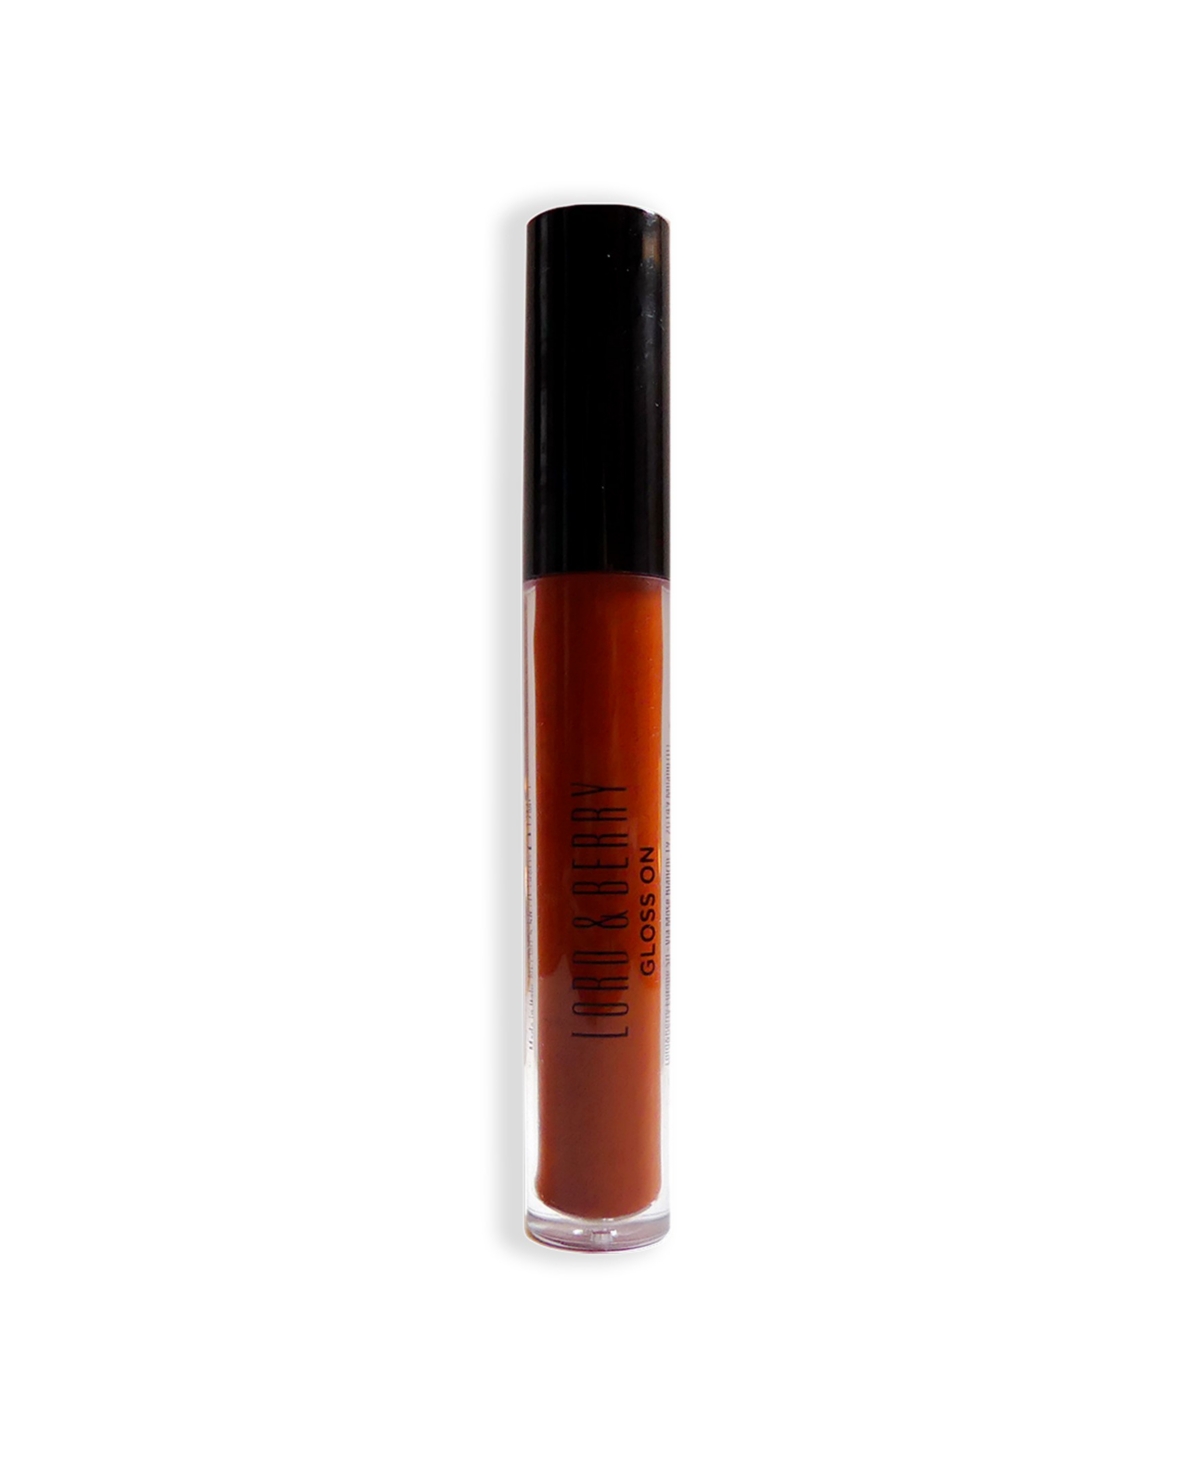 Lord & Berry Gloss On Lip Gloss, 5.5g. In Jam